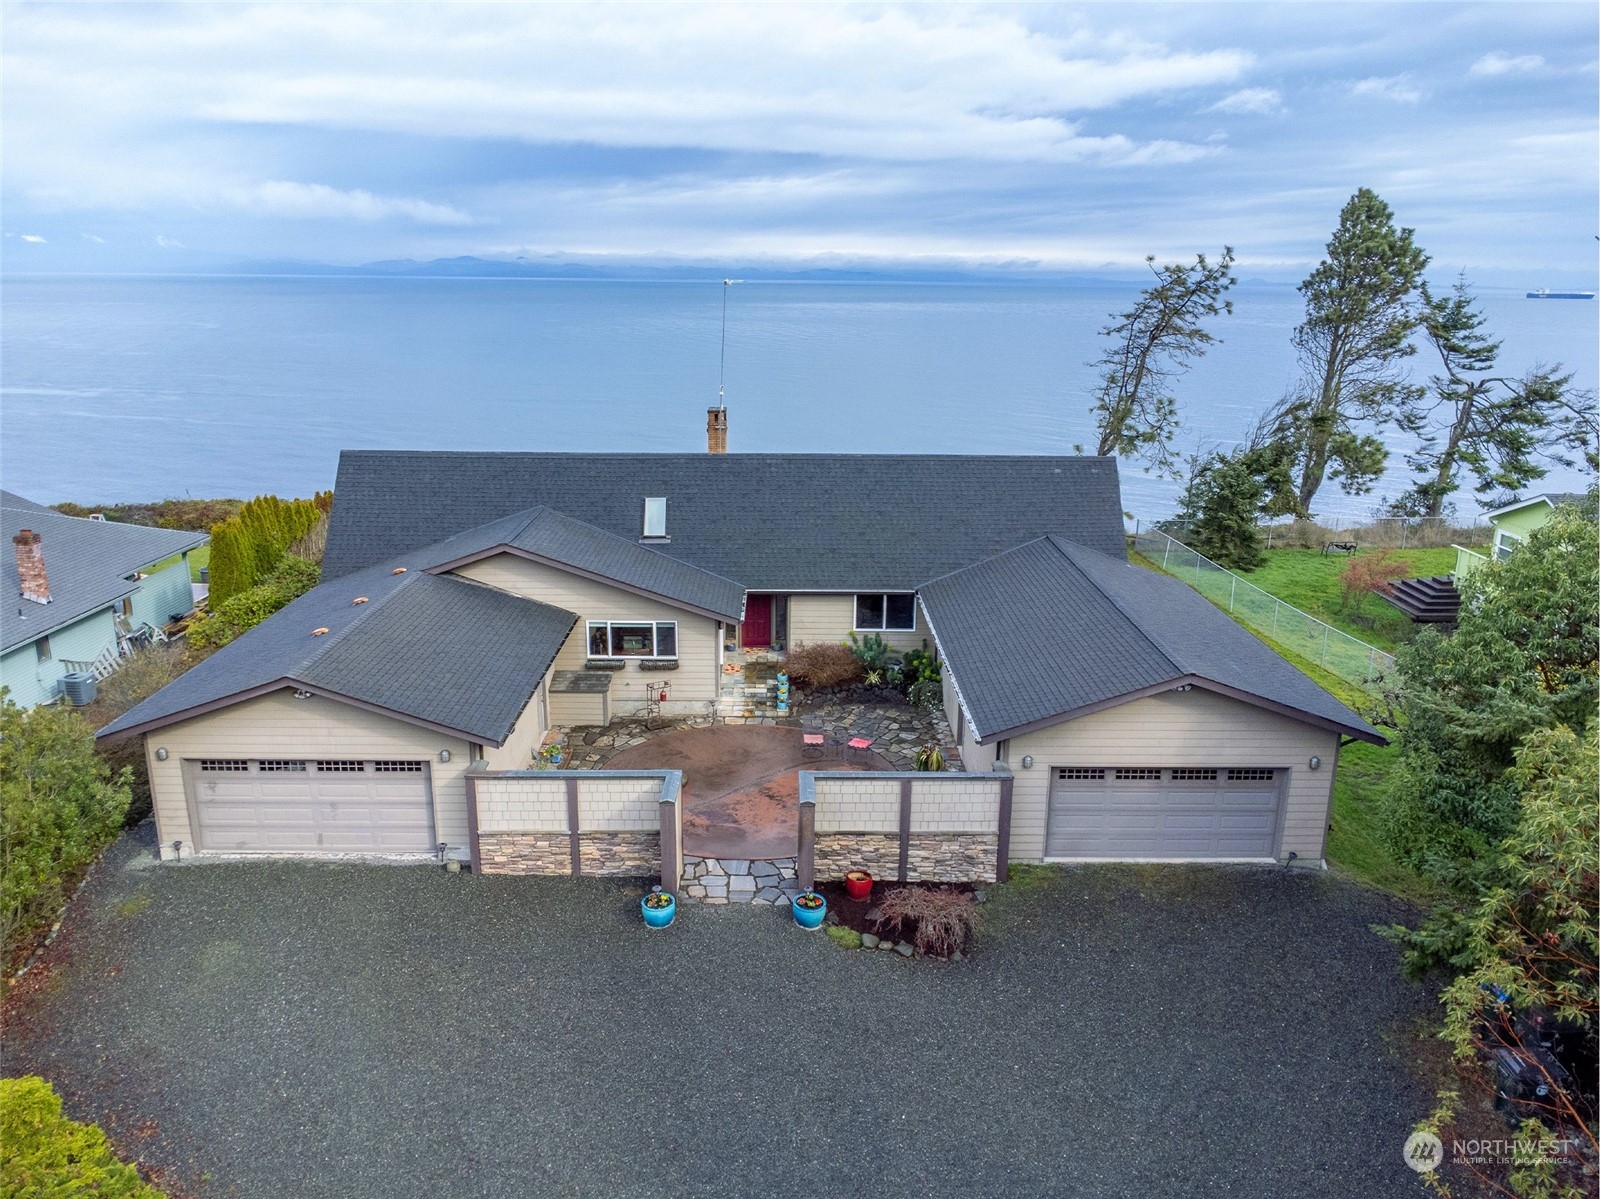 an aerial view of a house with roof deck fireplace and furniture